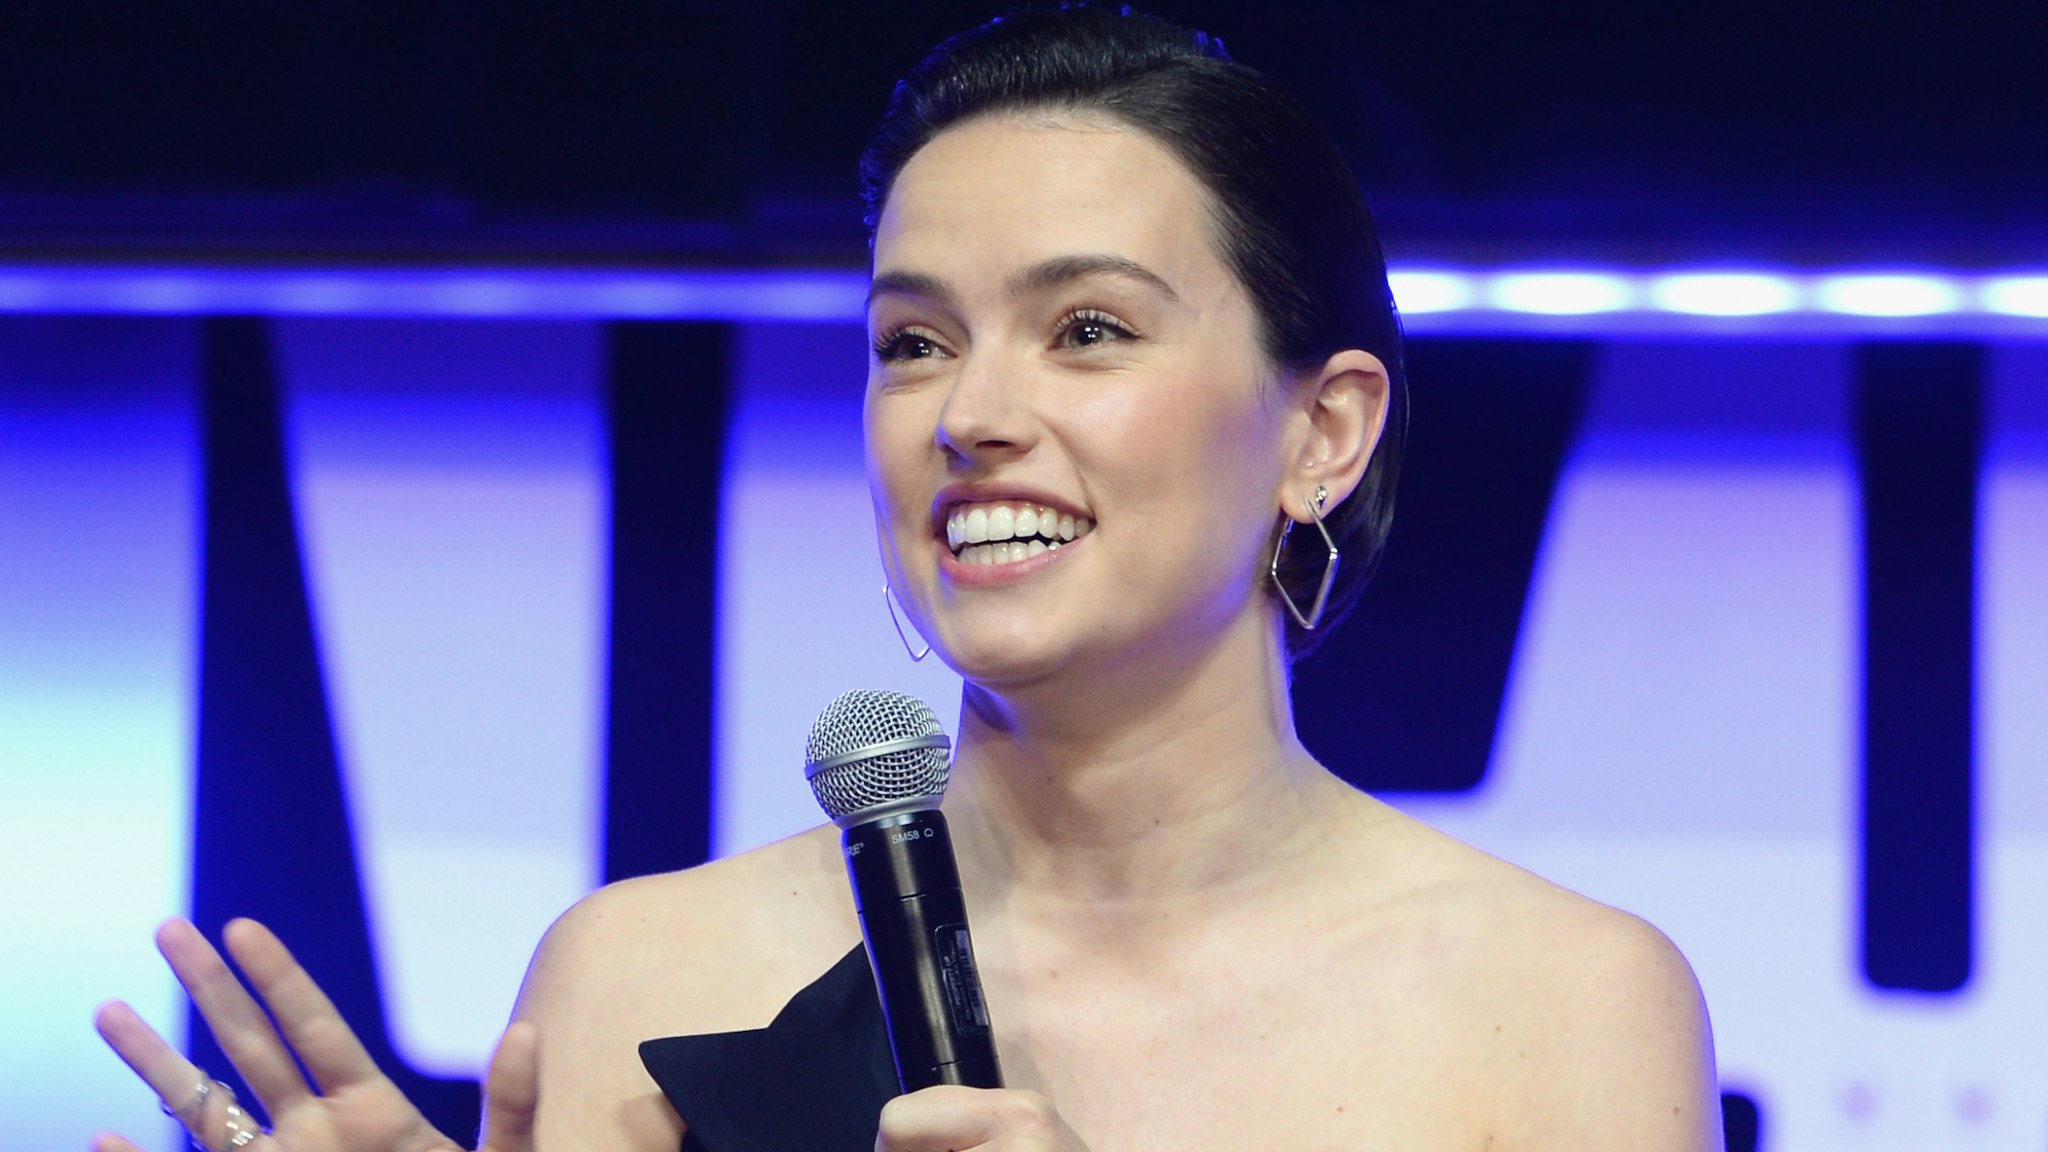 Daisy Ridley (Rey) onstage during "The Rise of Skywalker" panel at the Star Wars Celebration at McCormick Place Convention Center on April 12, 2019 in Chicago, Illinois. (Photo by Daniel Boczarski/Getty Images for Disney )